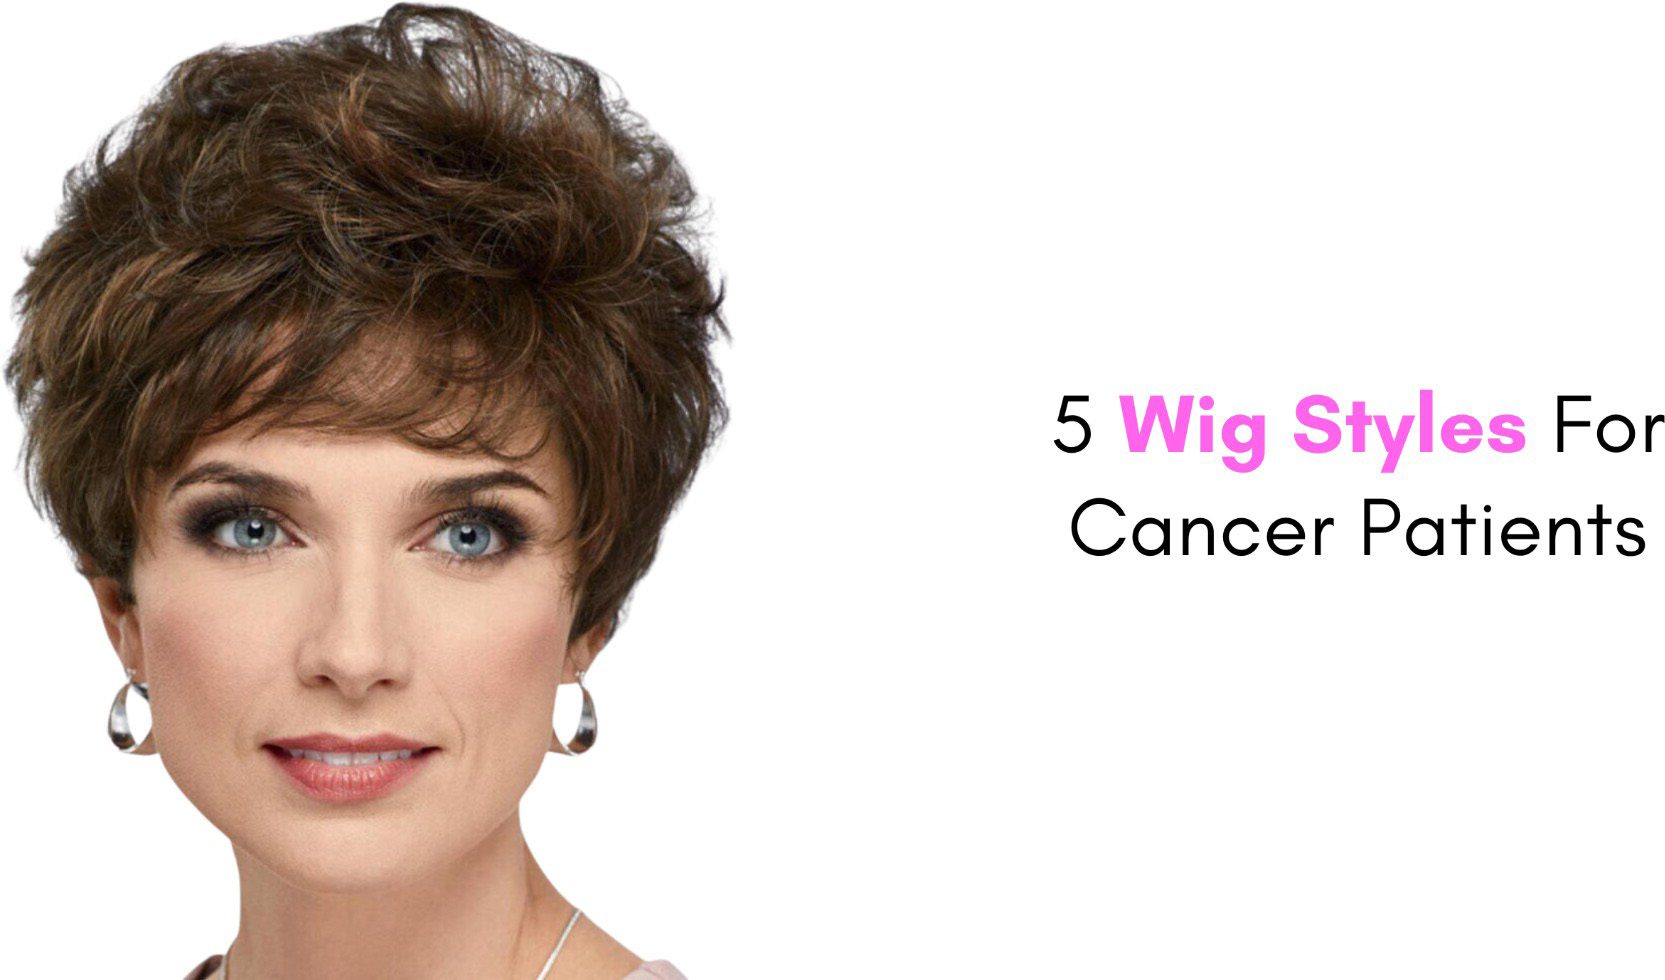 5 wig styles for cancer patients